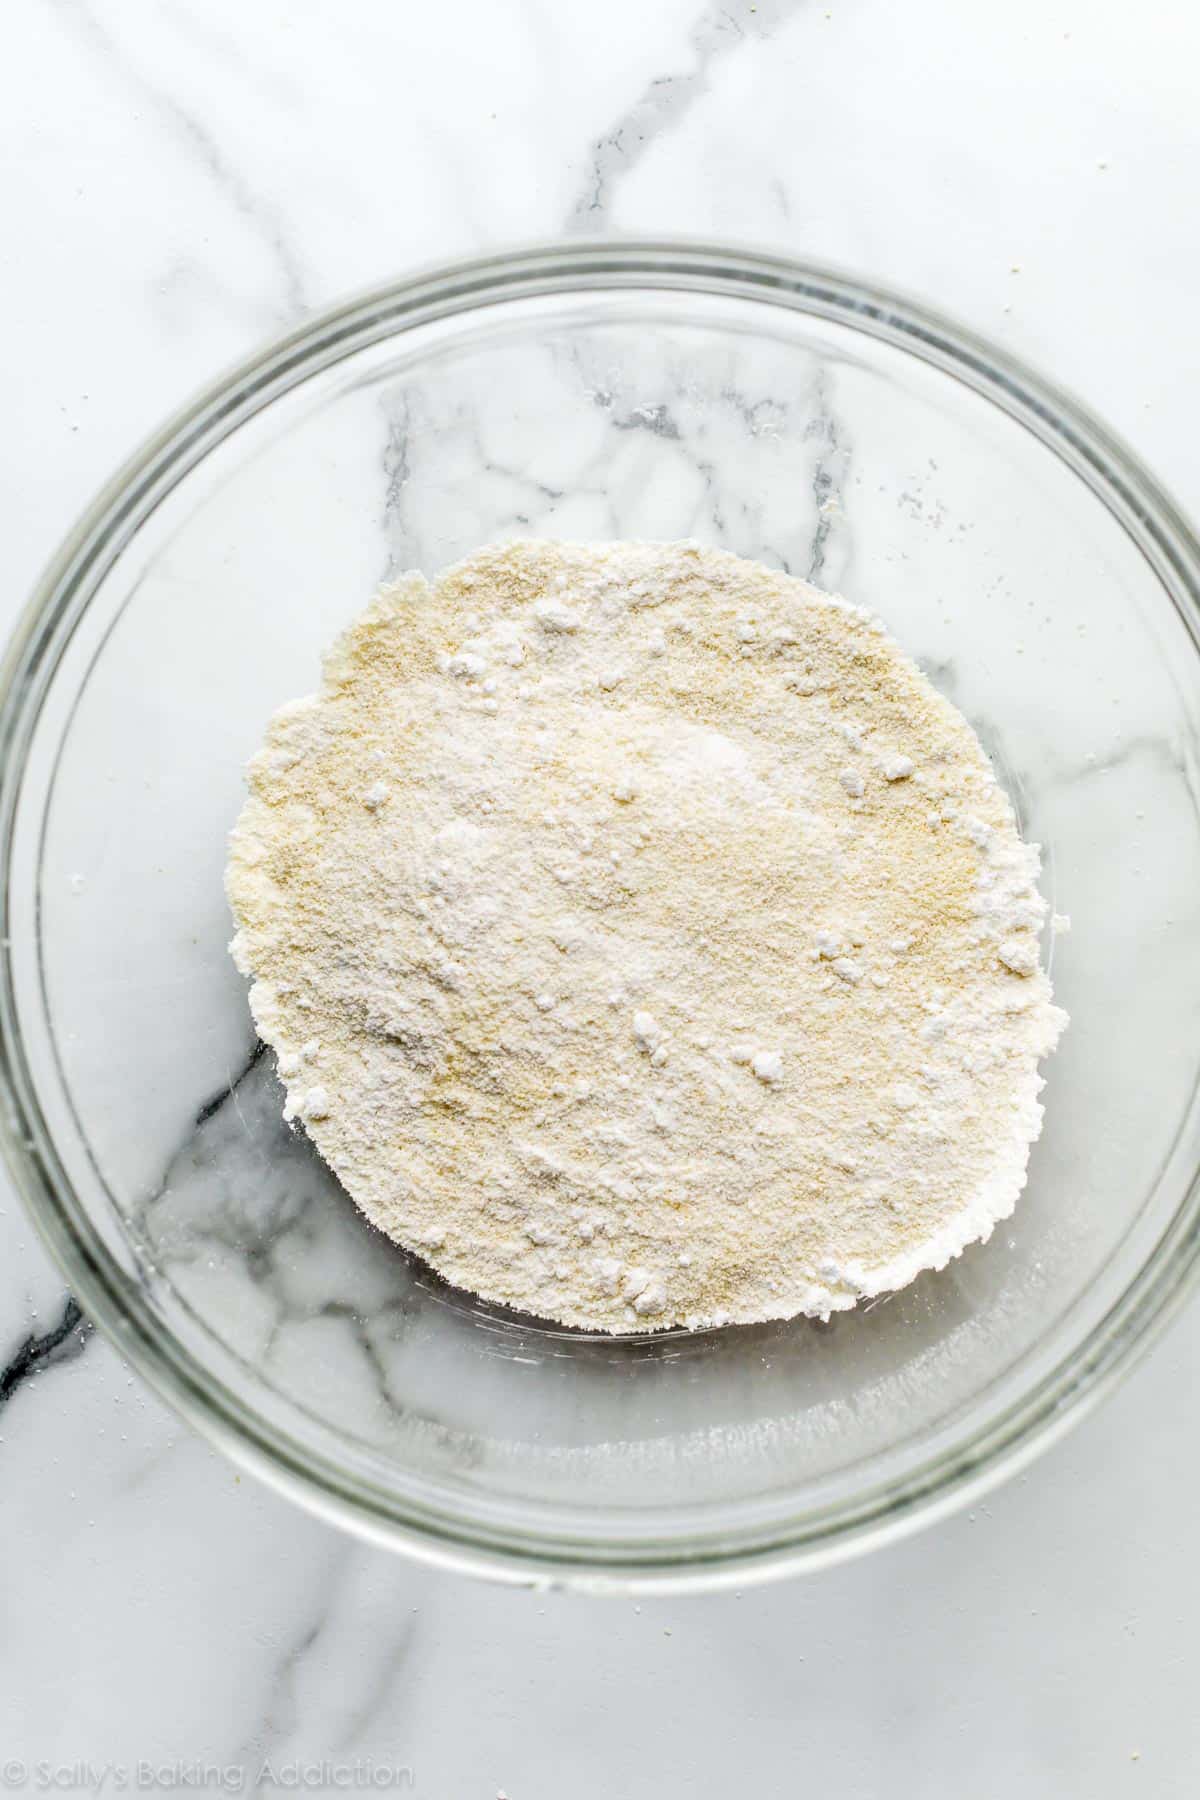 sifted almond flour and confectioners' sugar